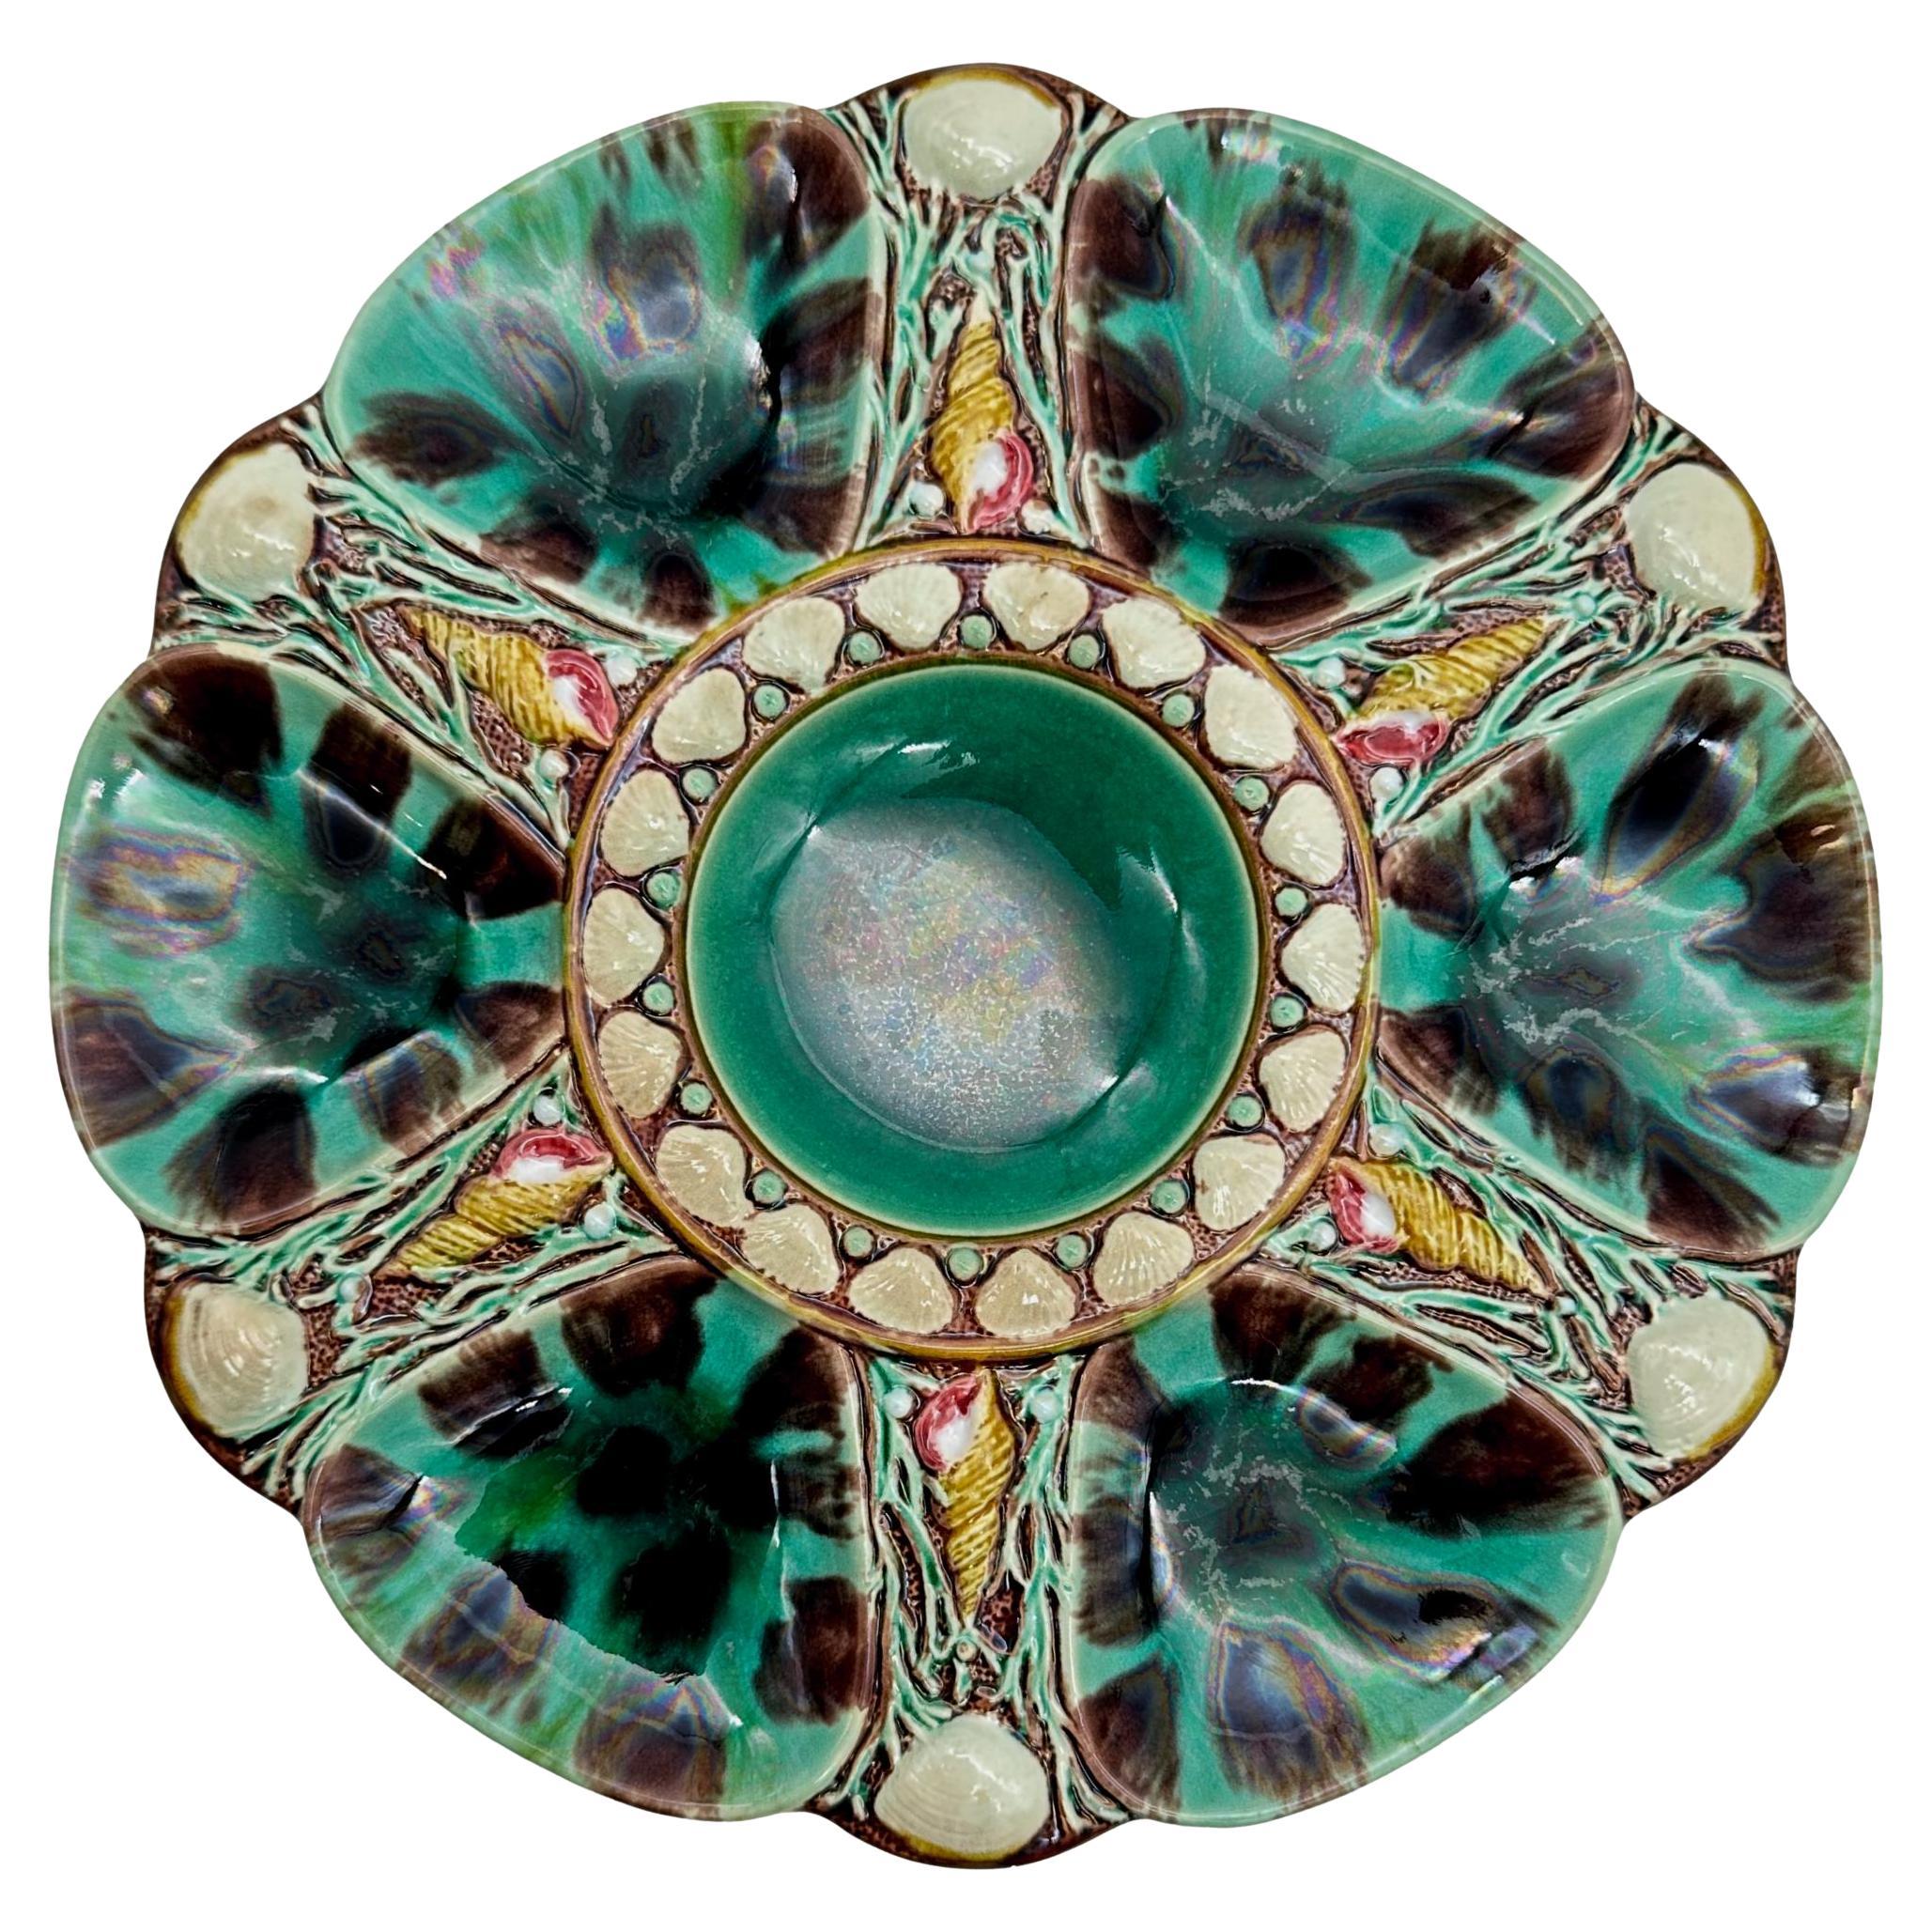 Minton Majolica Oyster Plate, Mottled Leopard Spots, English, Dated 1870 For Sale